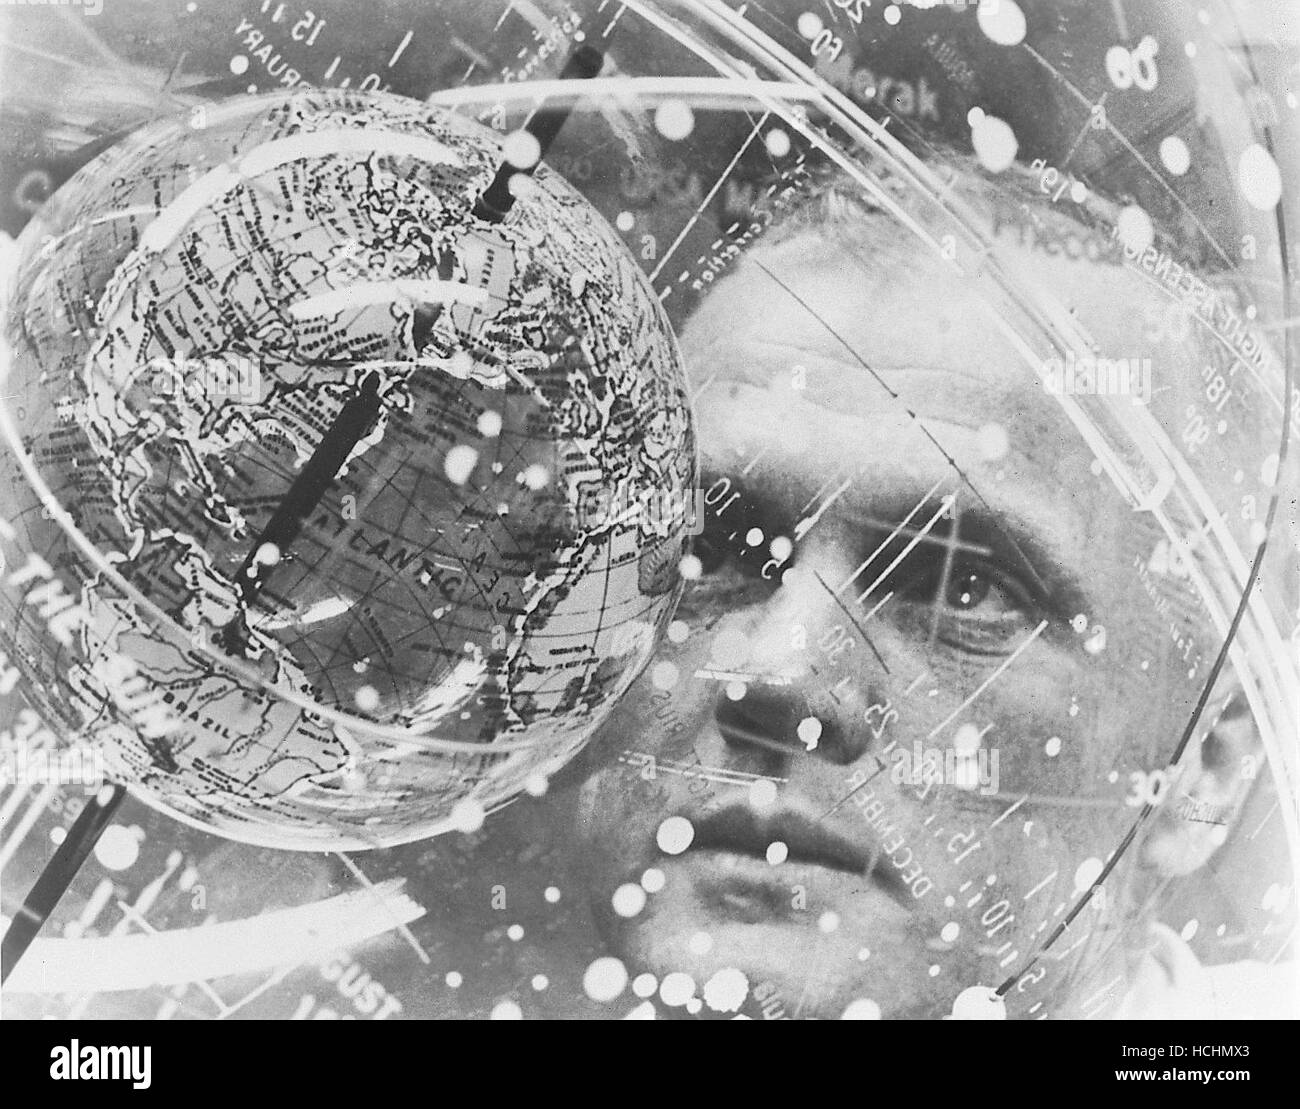 Astronaut John H. Glenn Jr. looks into a Celestial Training Device (globe) during training in the Aeromedical Laboratory at Cape Canaveral, Florida in February, 1962.Credit: NASA via CNP /MediaPunch Stock Photo